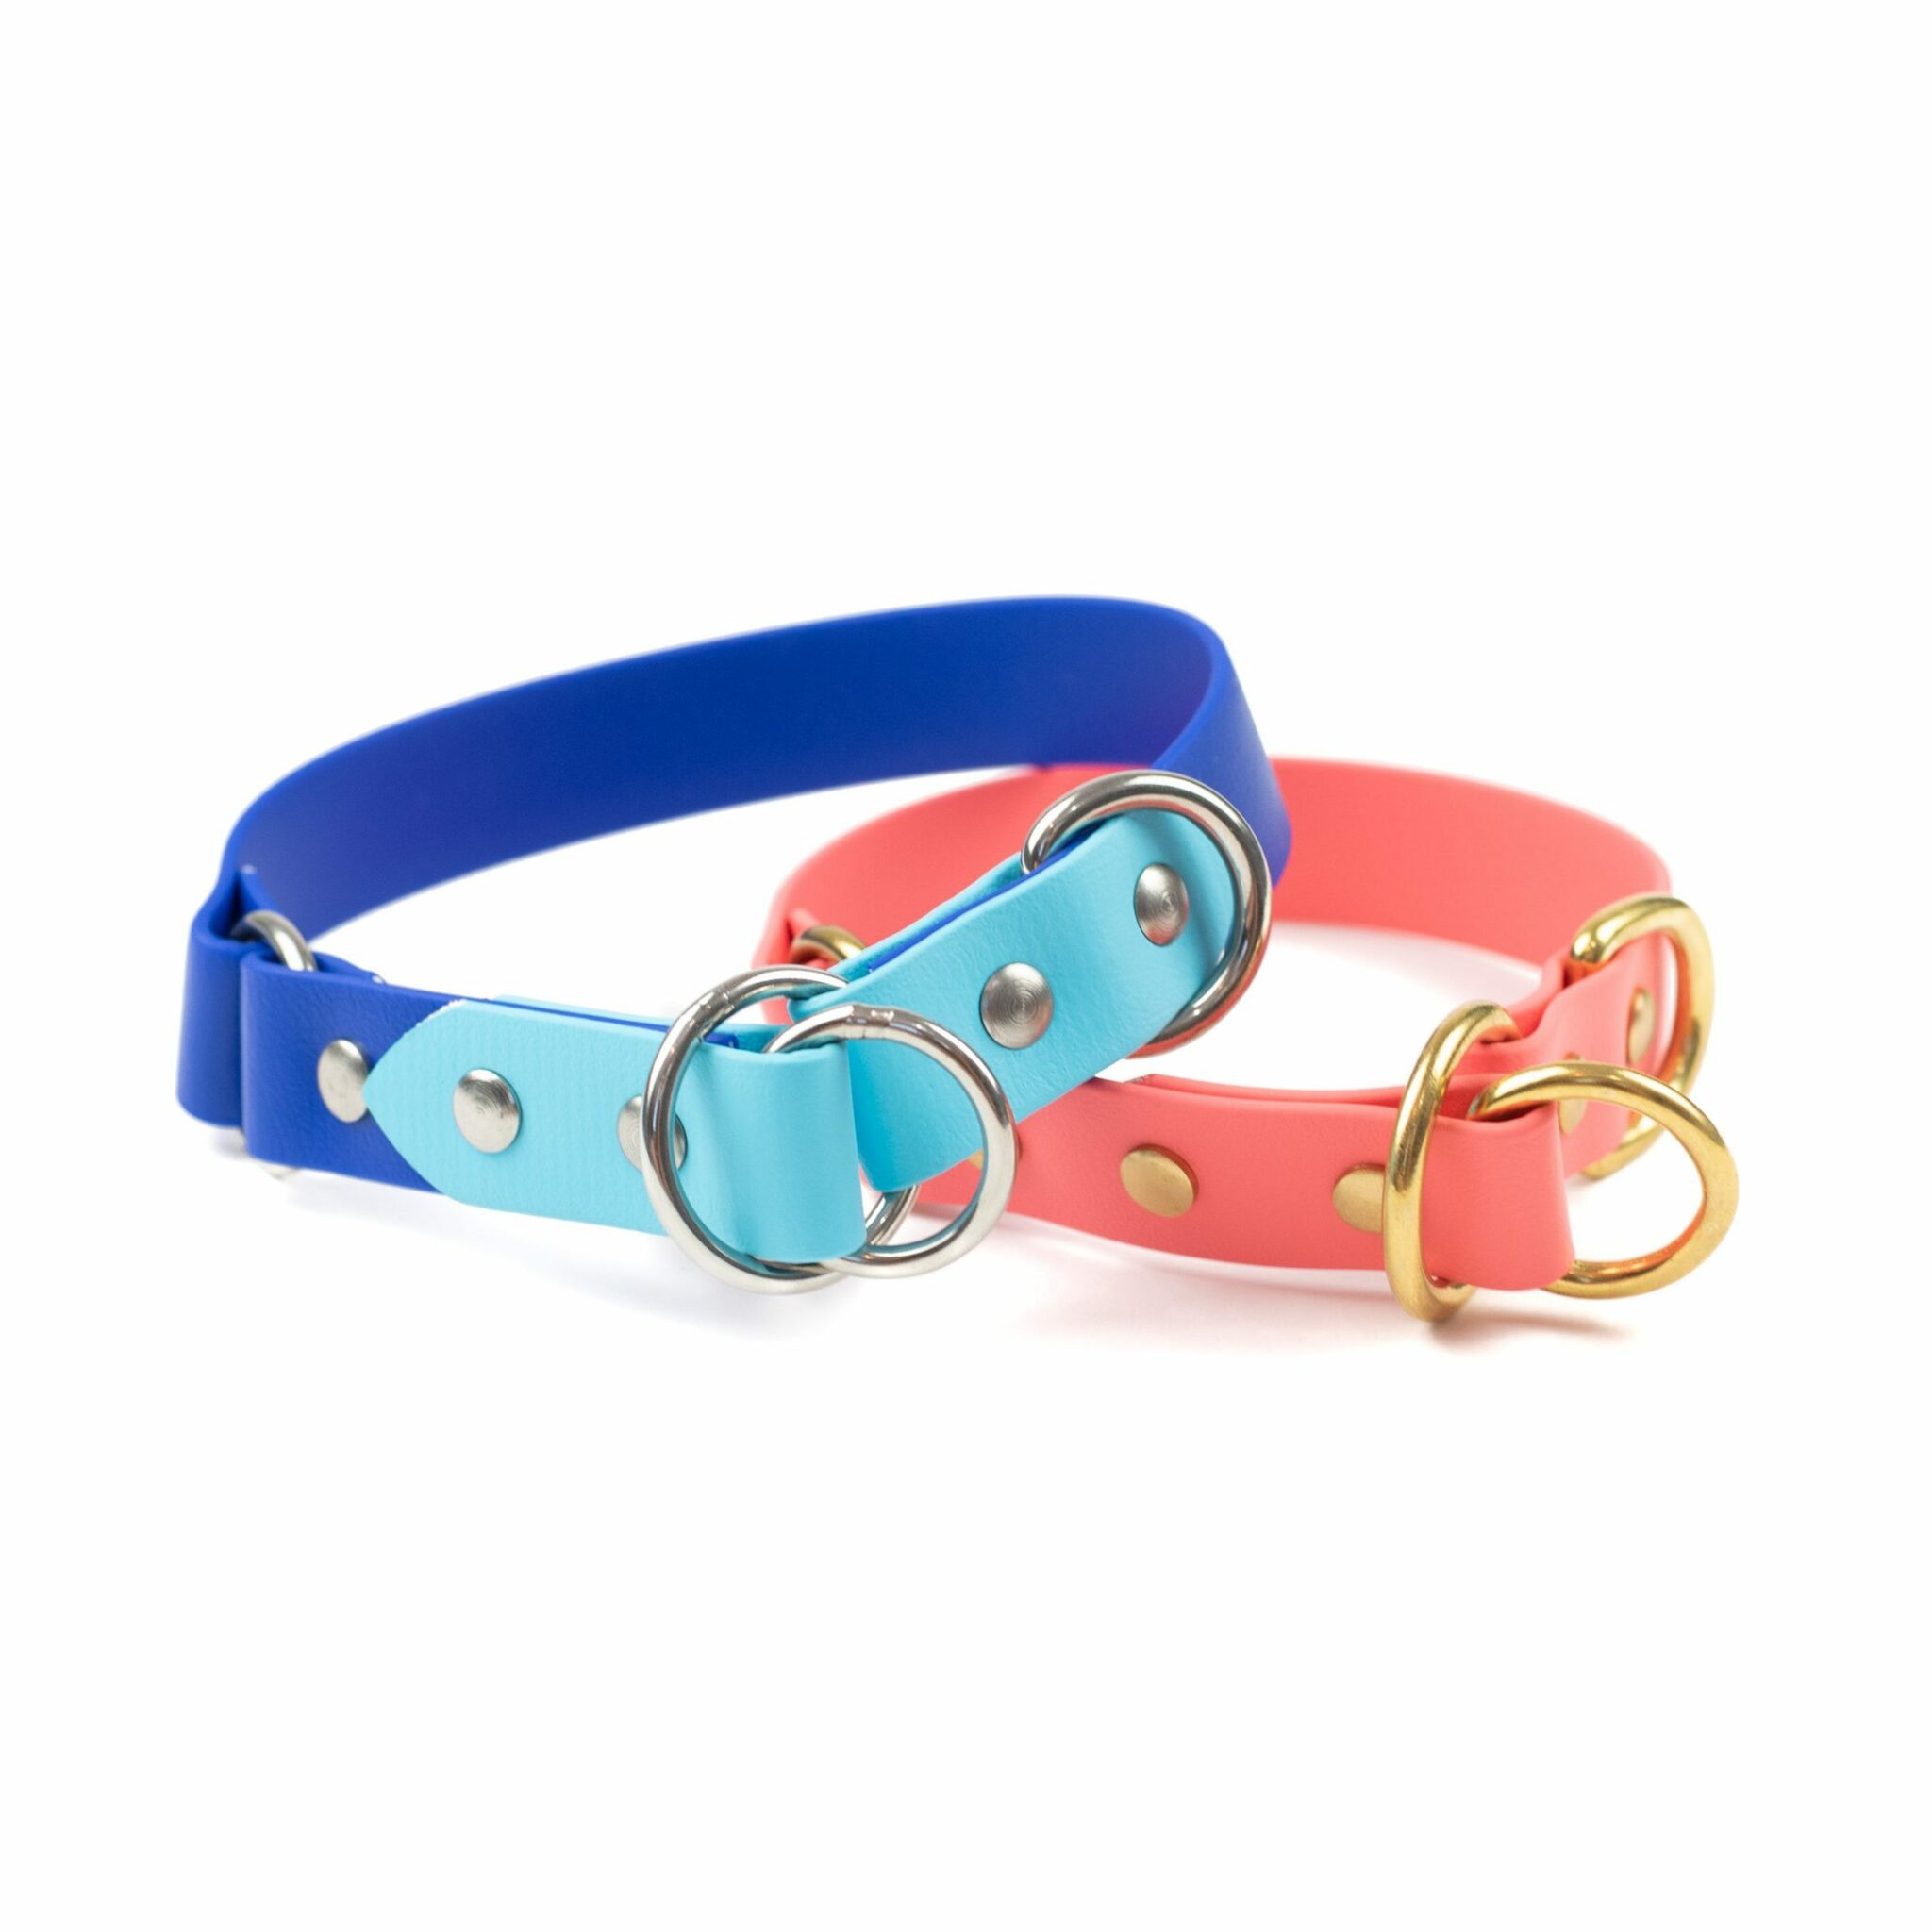 Blue tone and coral 1" o-ring limited slip collar make from biothane